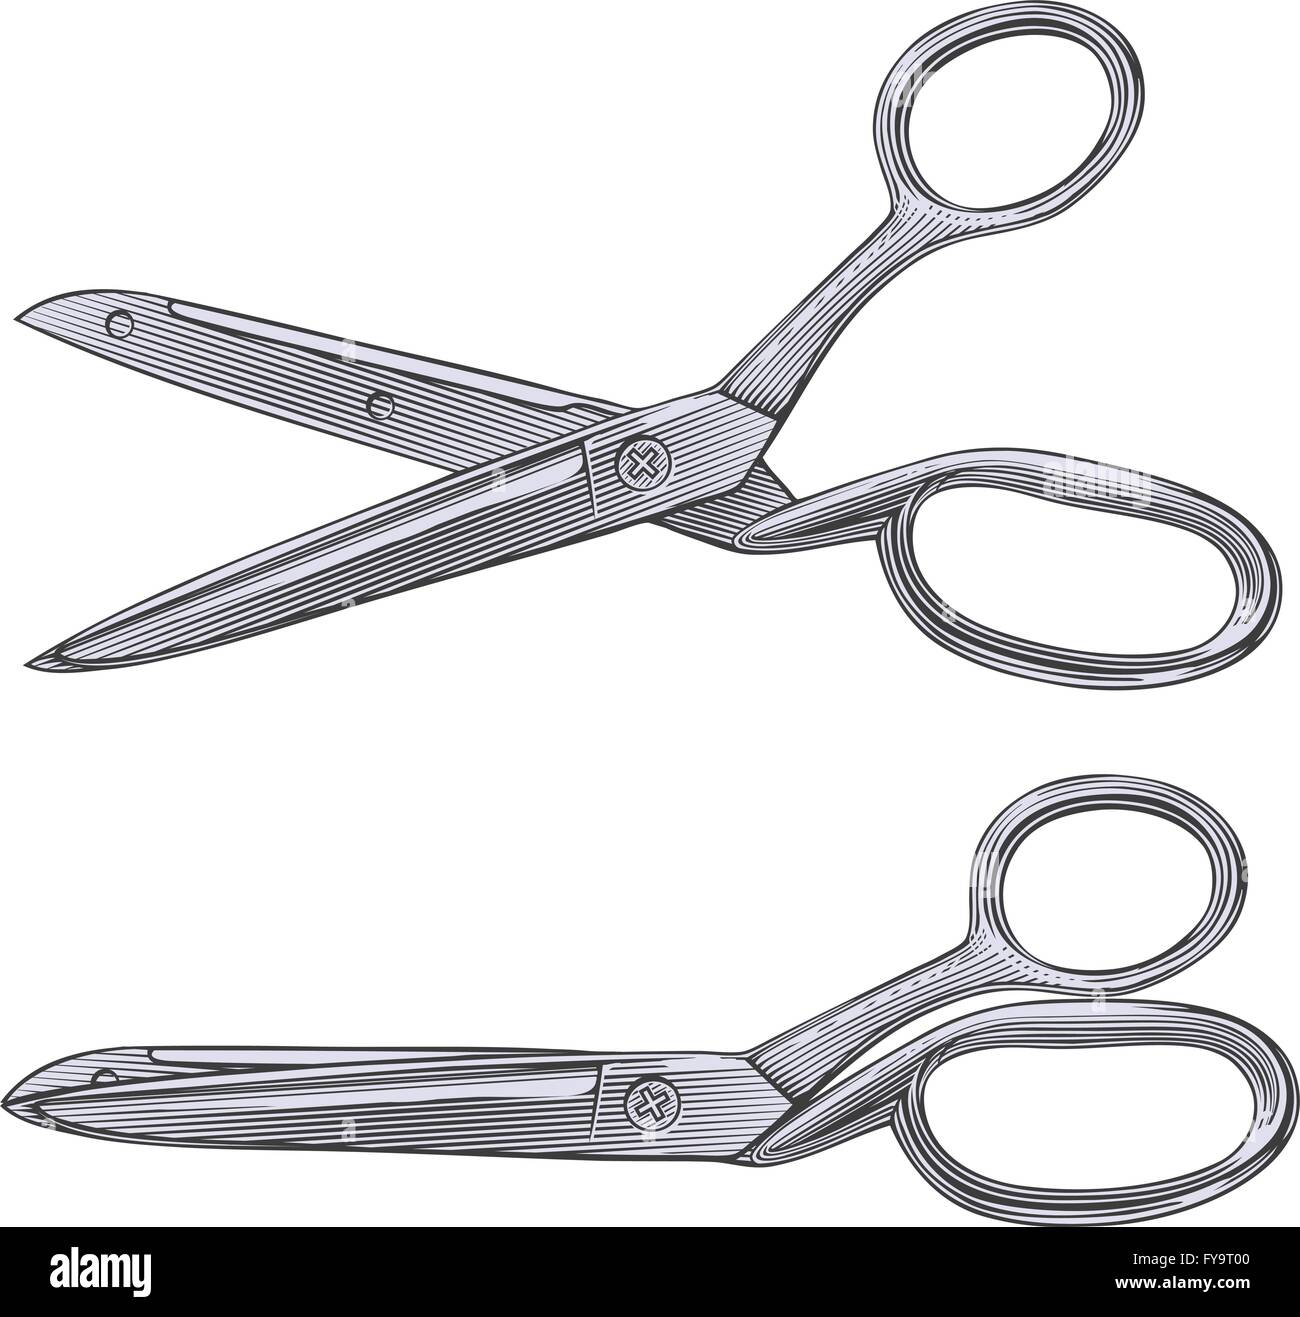 Scissors in vintage engraving style on transparent background Stock Vector